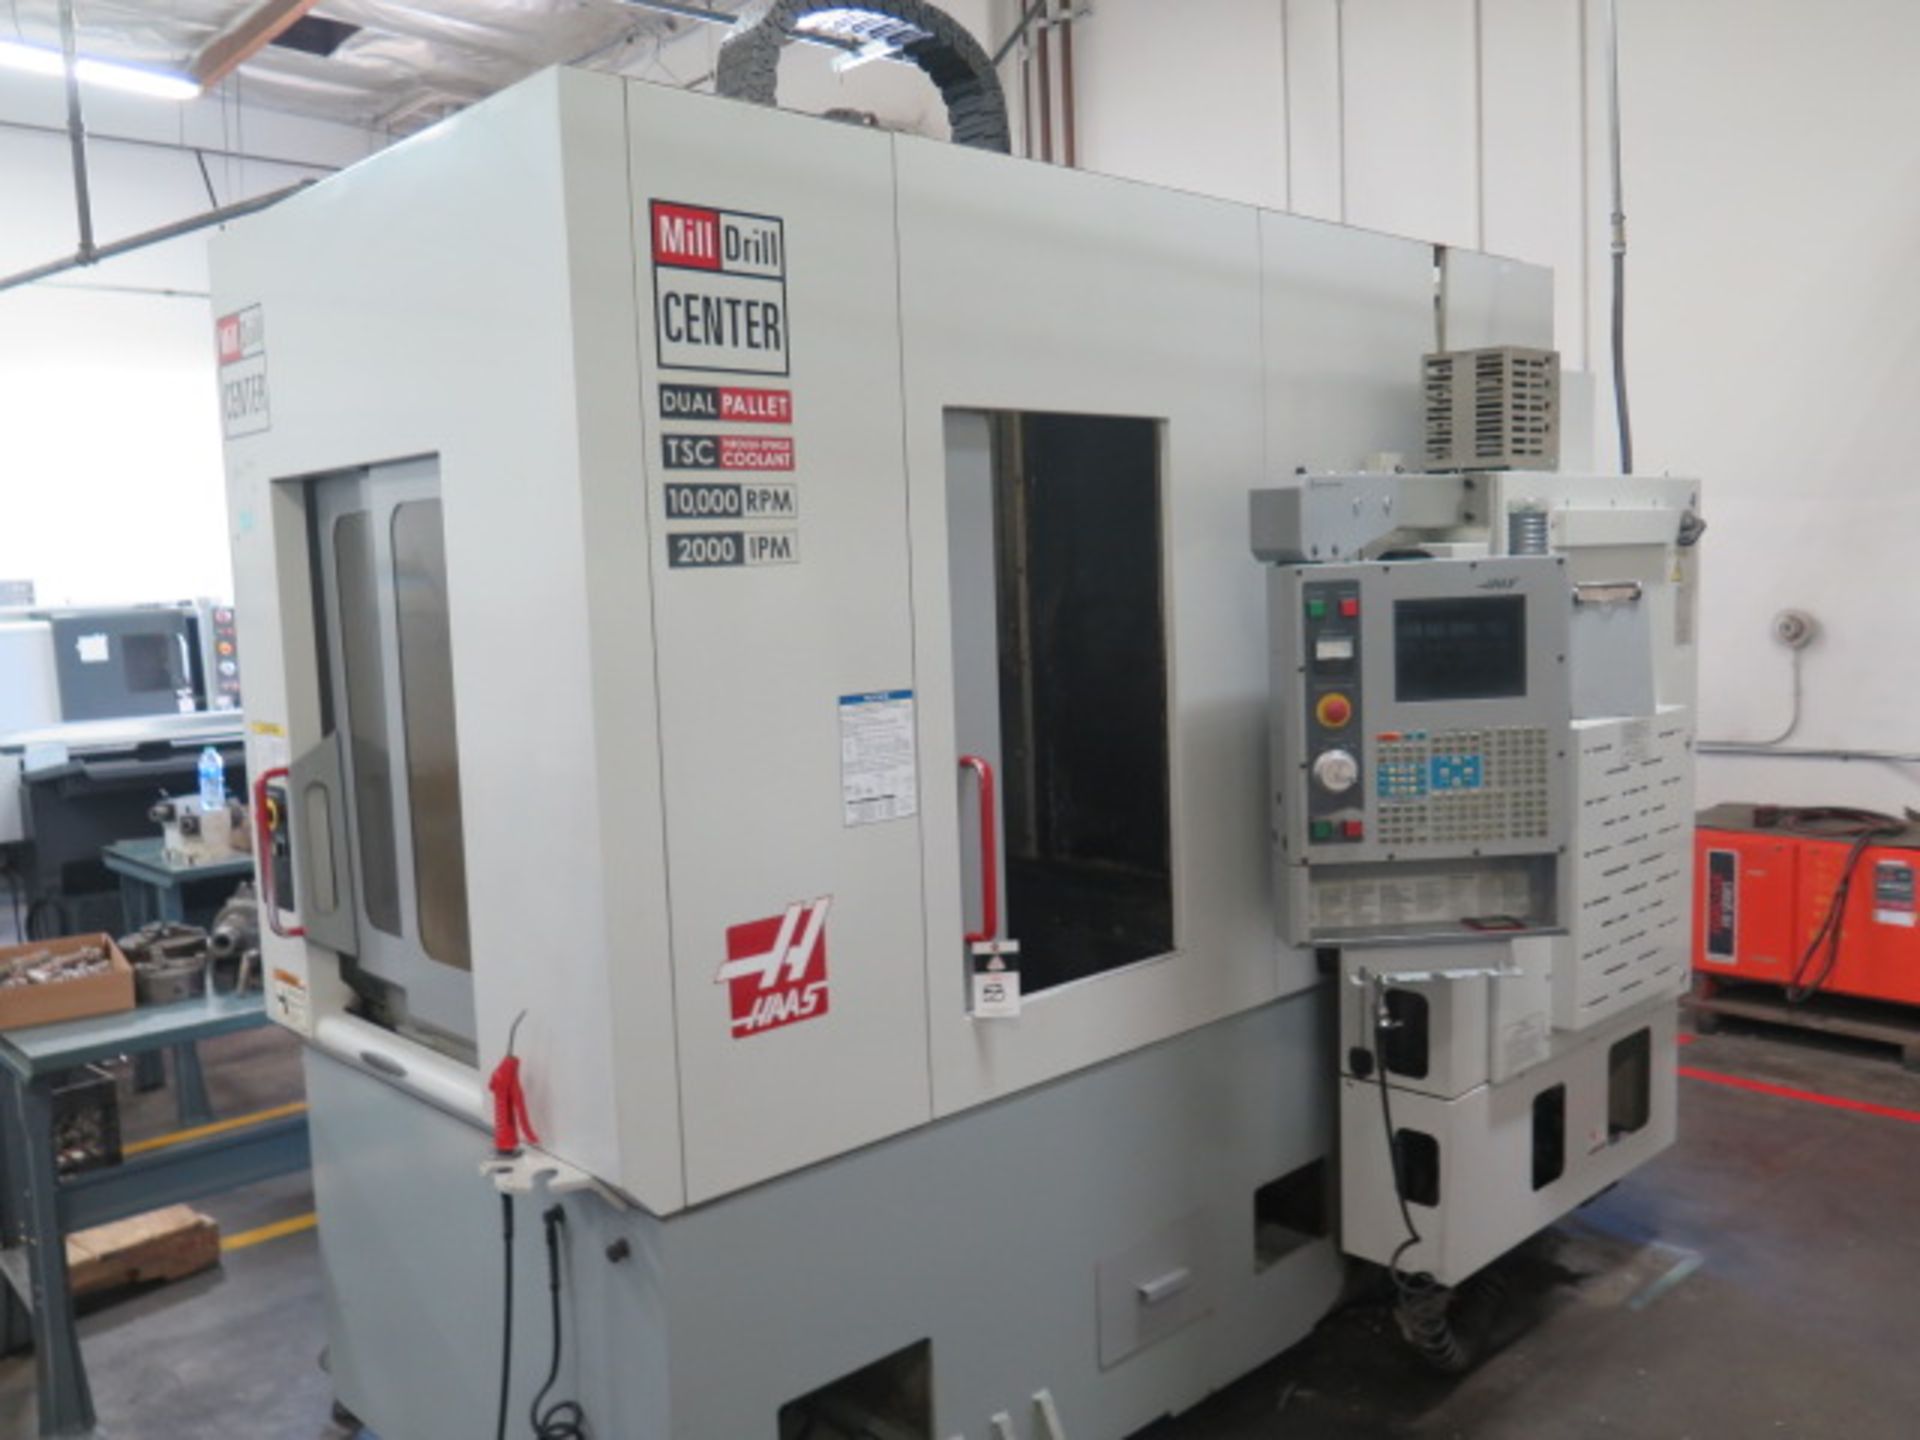 2003 Haas MDC-1 Dual Pallet CNC Milling / Drilling Center s/n 32186 w/ Haas Controls, SOLD AS IS